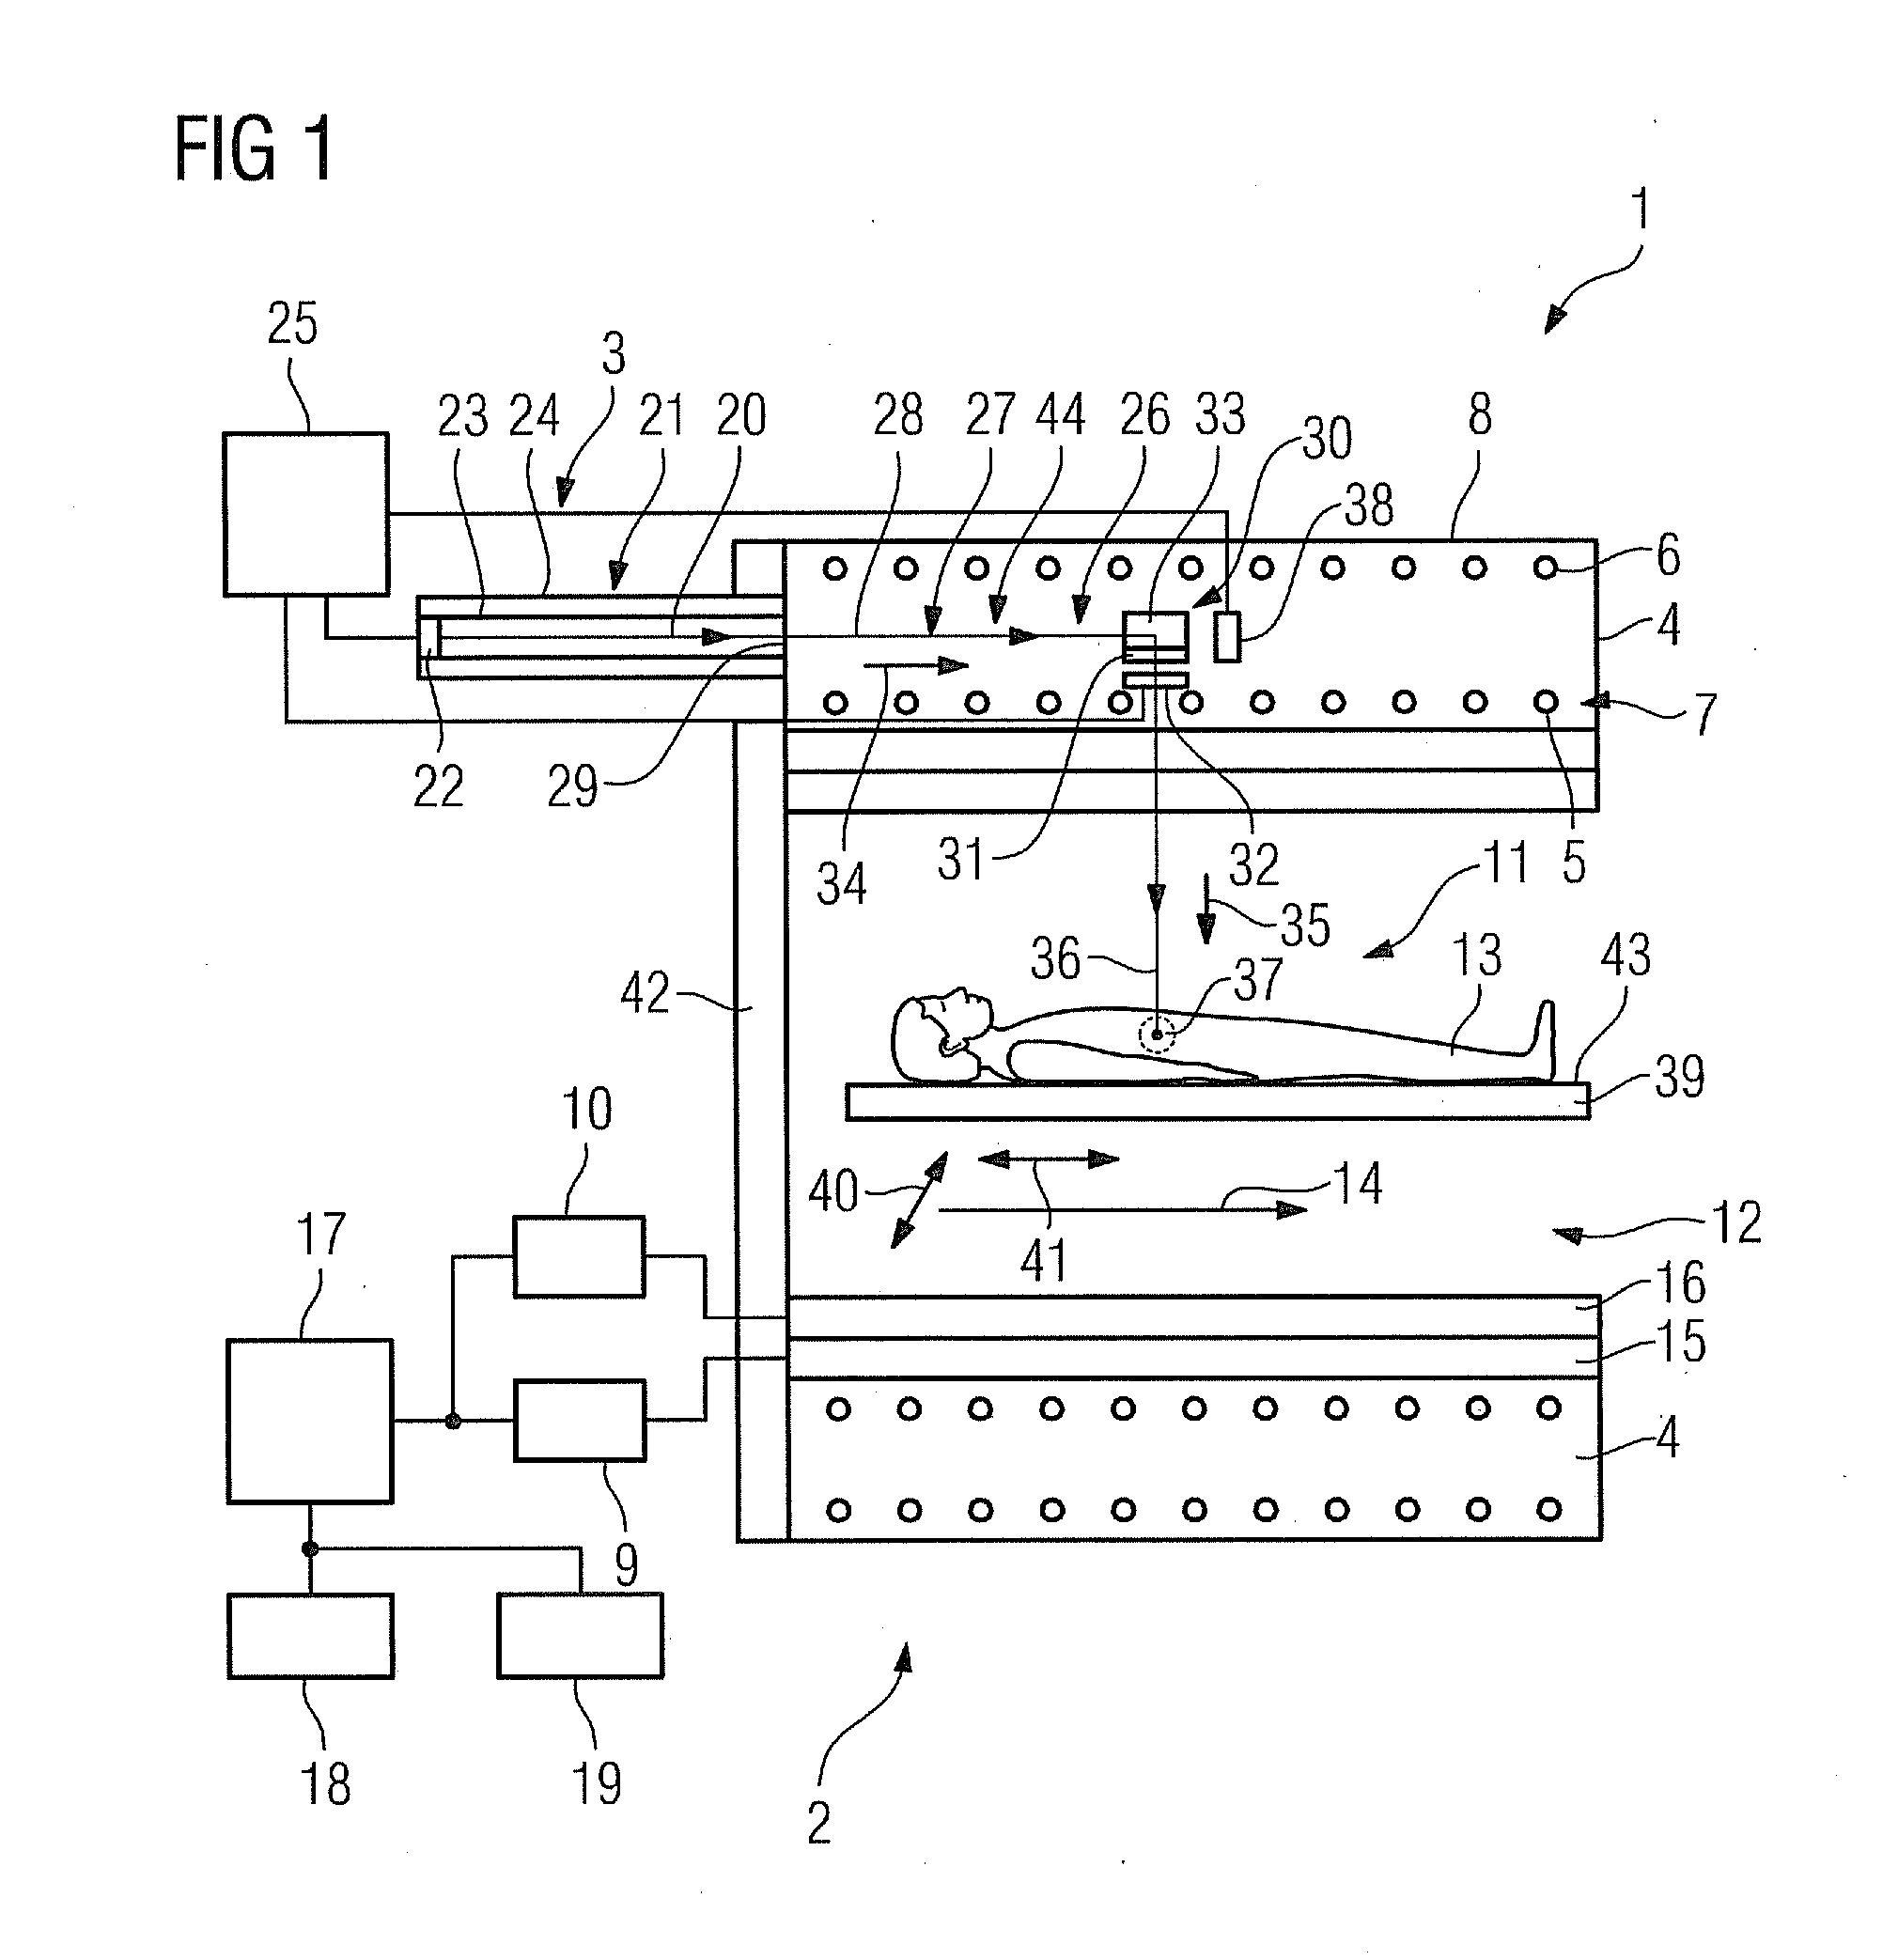 Apparatus Having a Combined Magnetic Resonance Apparatus and Radiation Therapy Apparatus